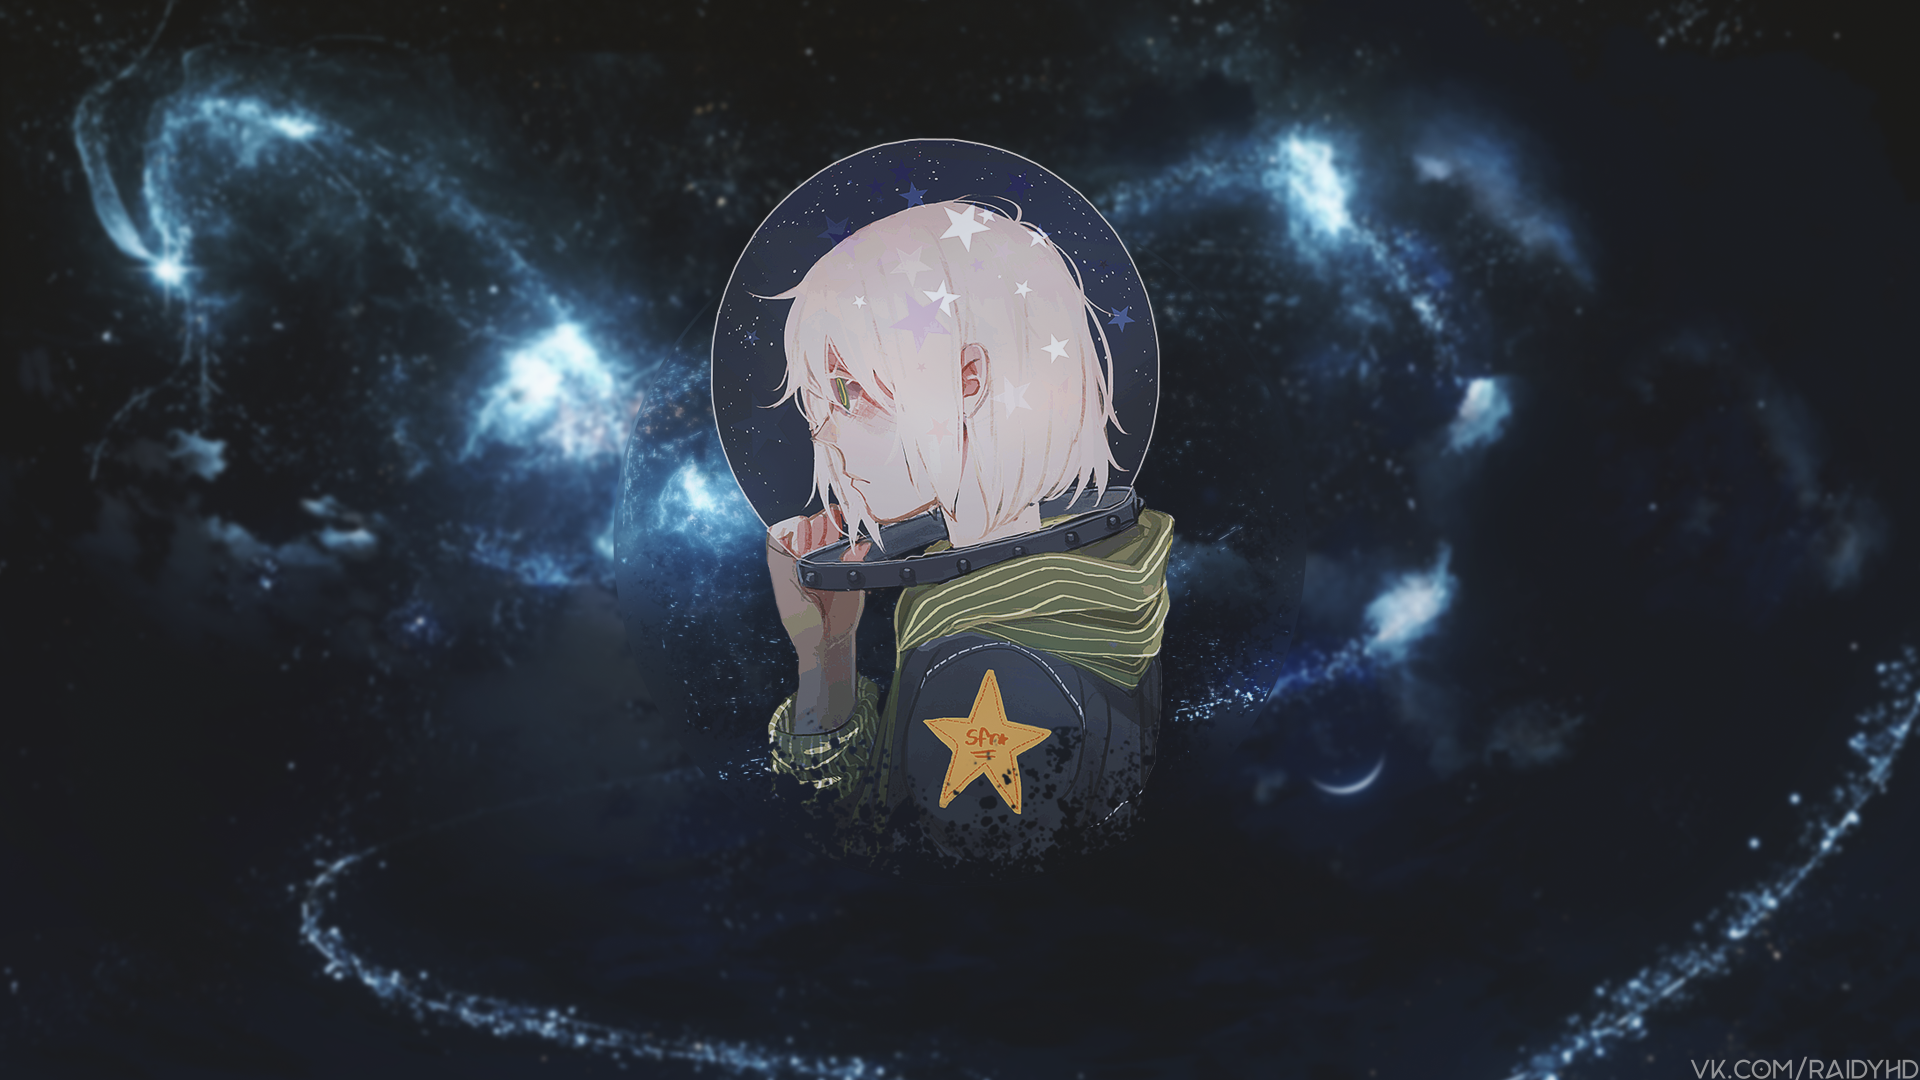 Download 1920x1080 Anime Girl, Spacesuit, Astronaut, Galaxy Wallpaper for Widescreen